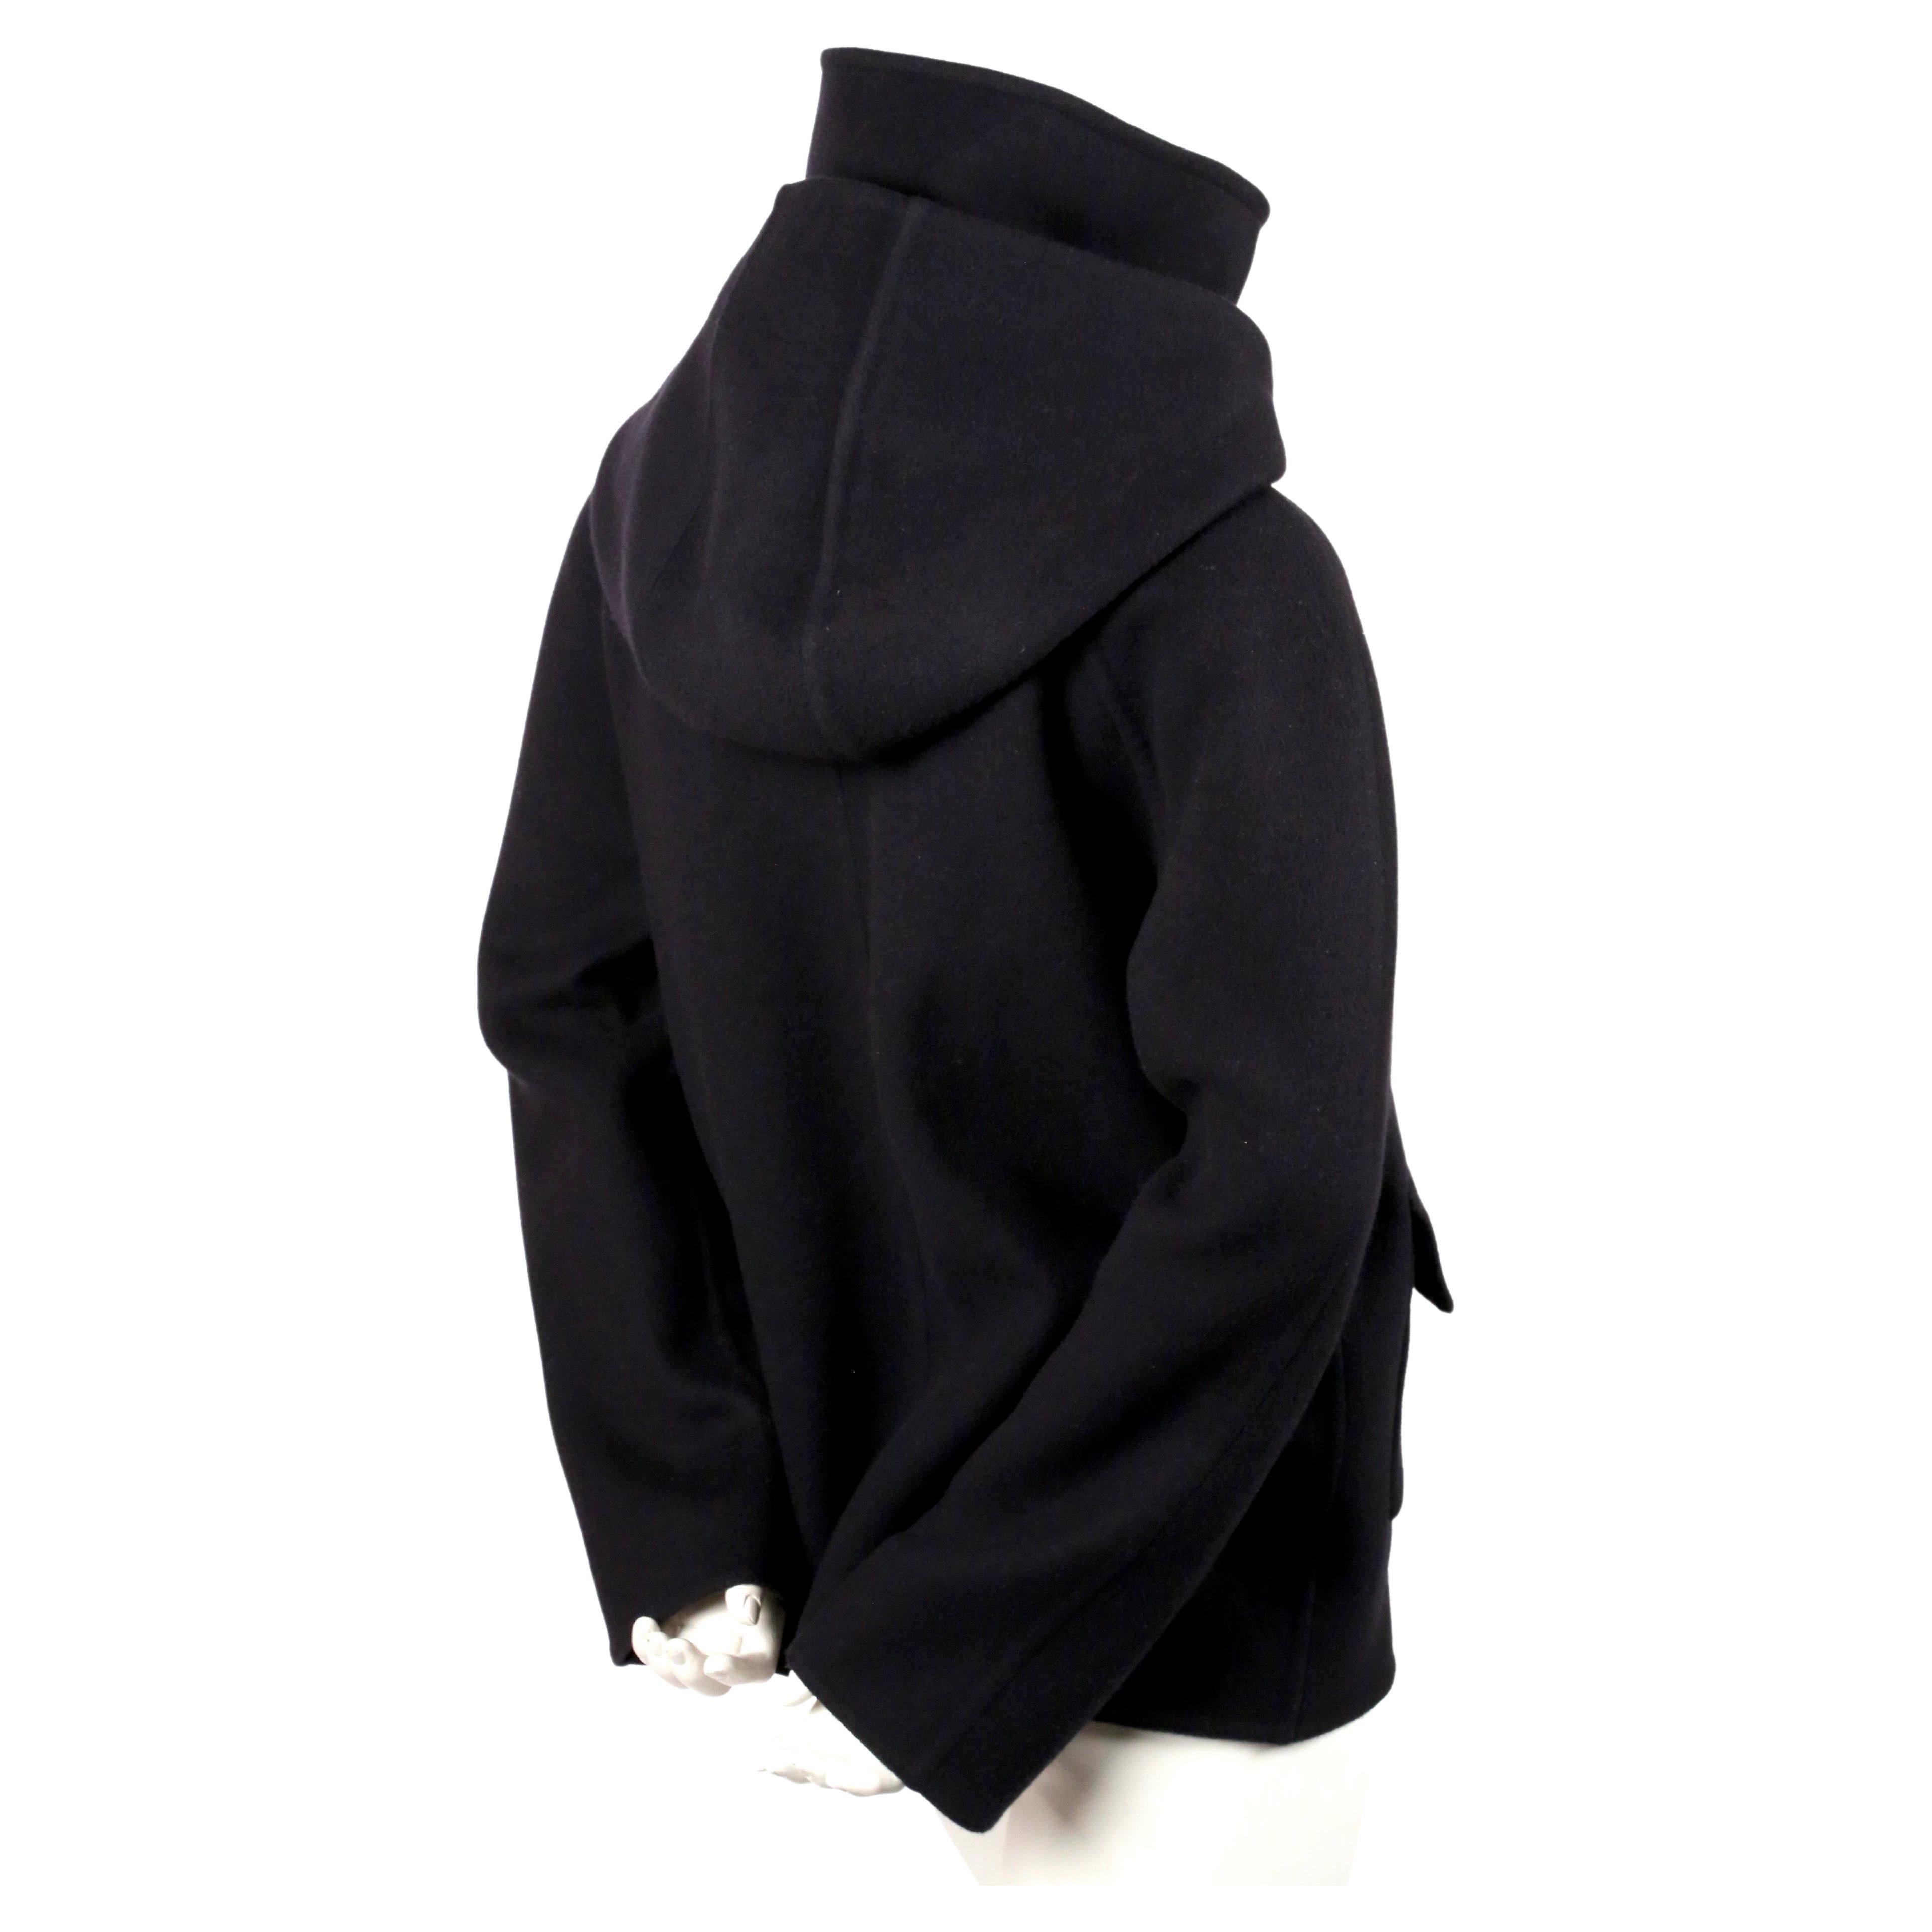 Darkest navy, double-faced cashmere jacket with hood and patch pockets designed by Phoebe Philo for Celine as seen in the pre-fall collection of 2014. French size 38. Approximate measurements: bust 40